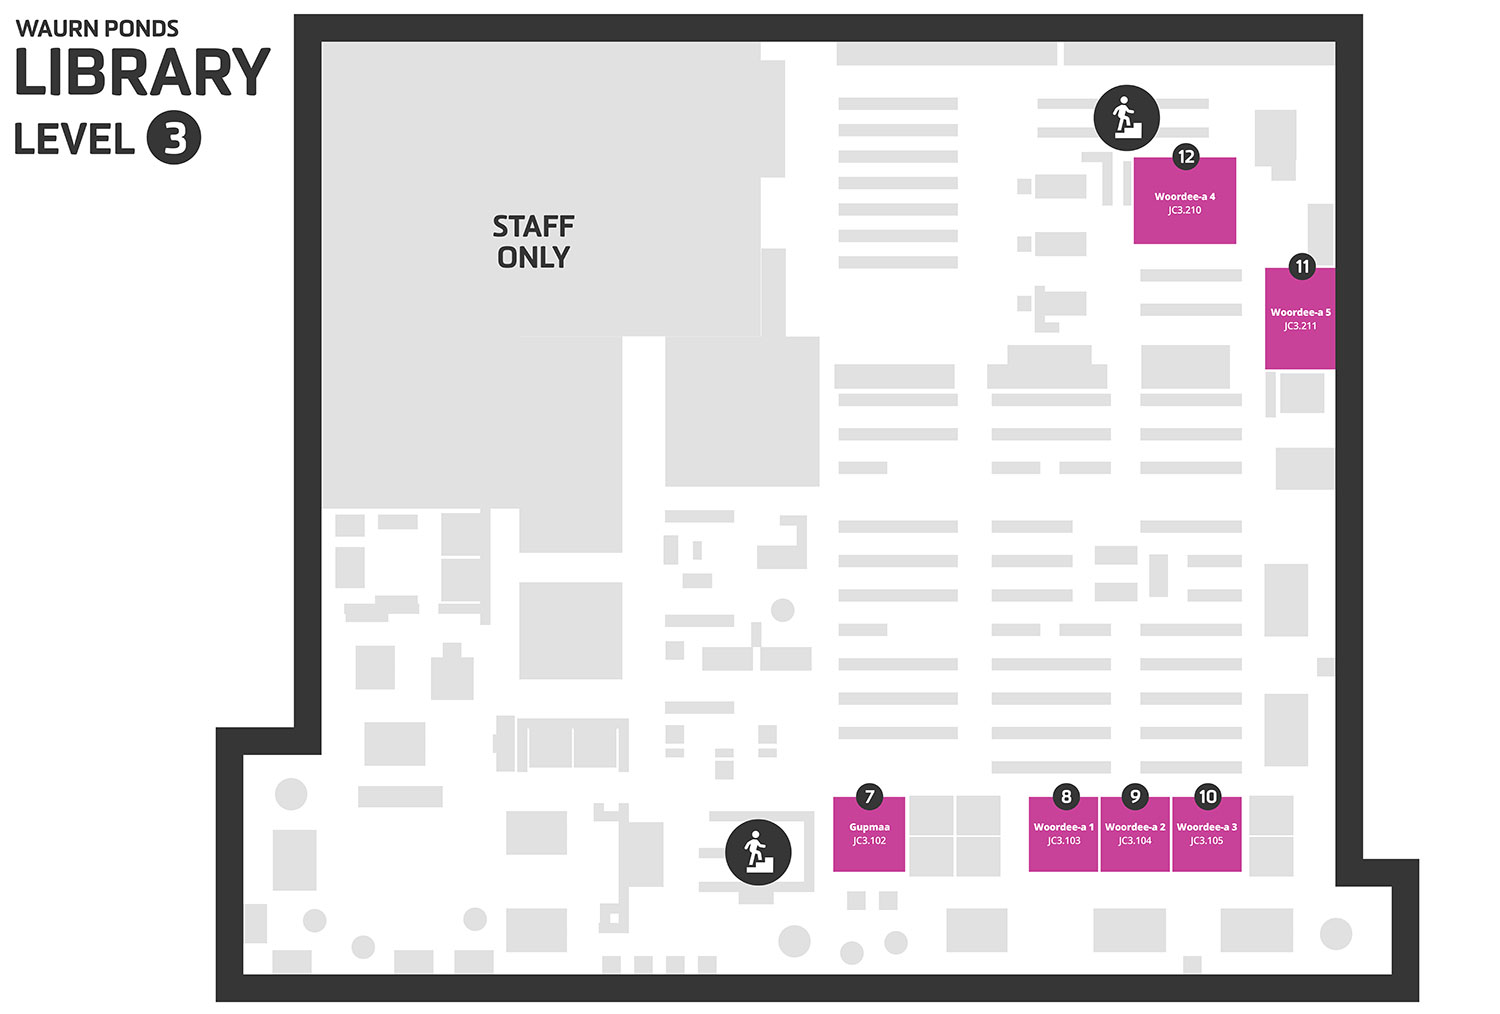 Floorplan of Waurn Ponds Campus Library Level 3, showing bookable rooms